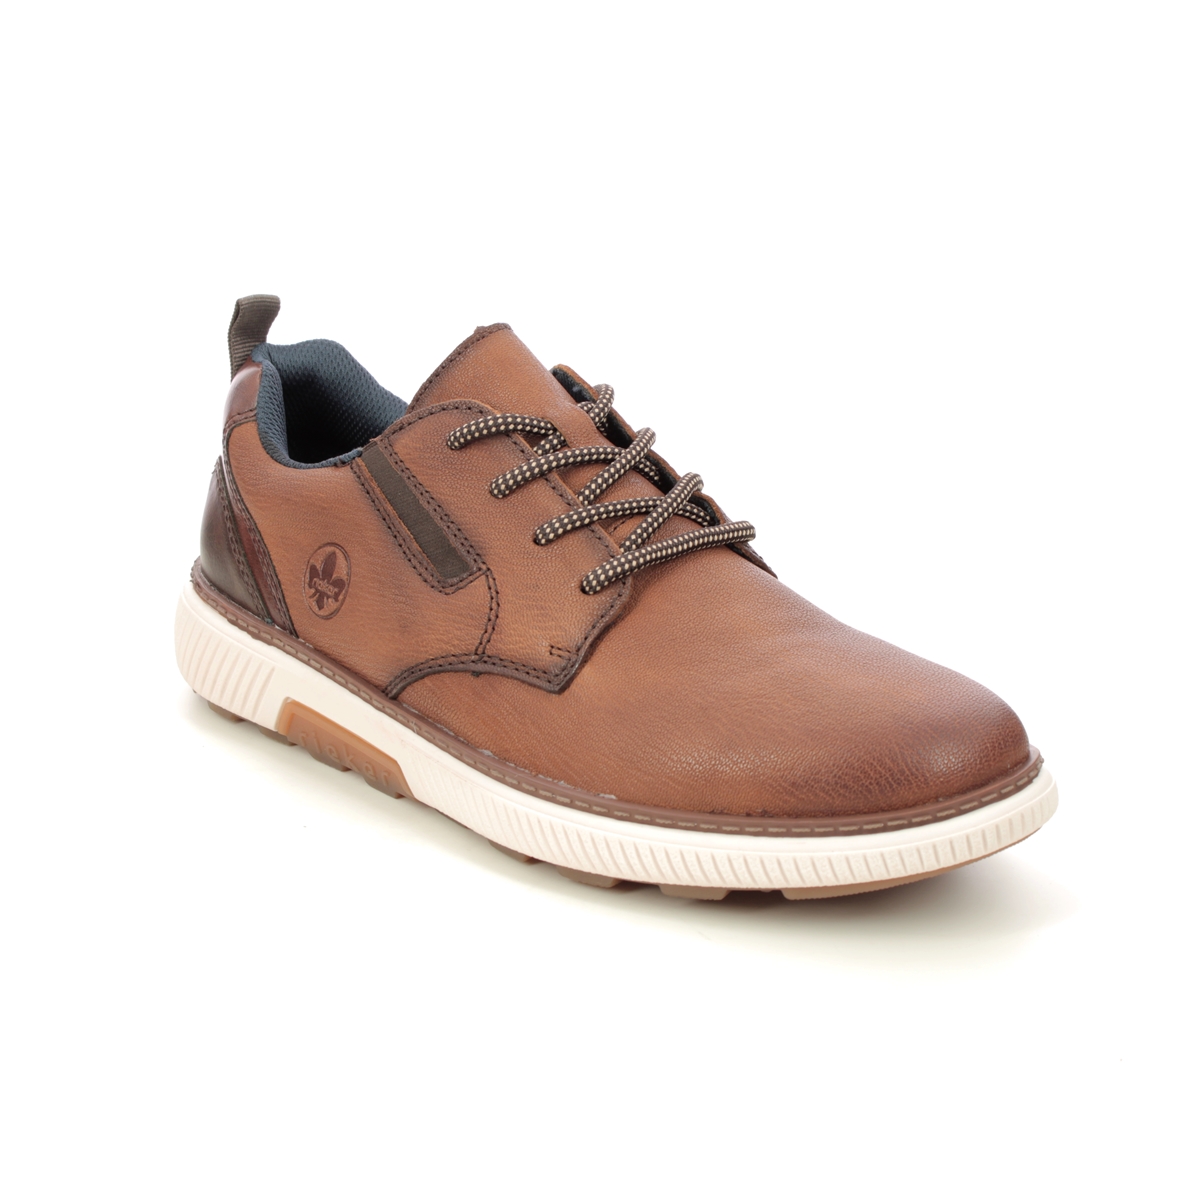 Rieker B3301-22 Leather comfort shoes